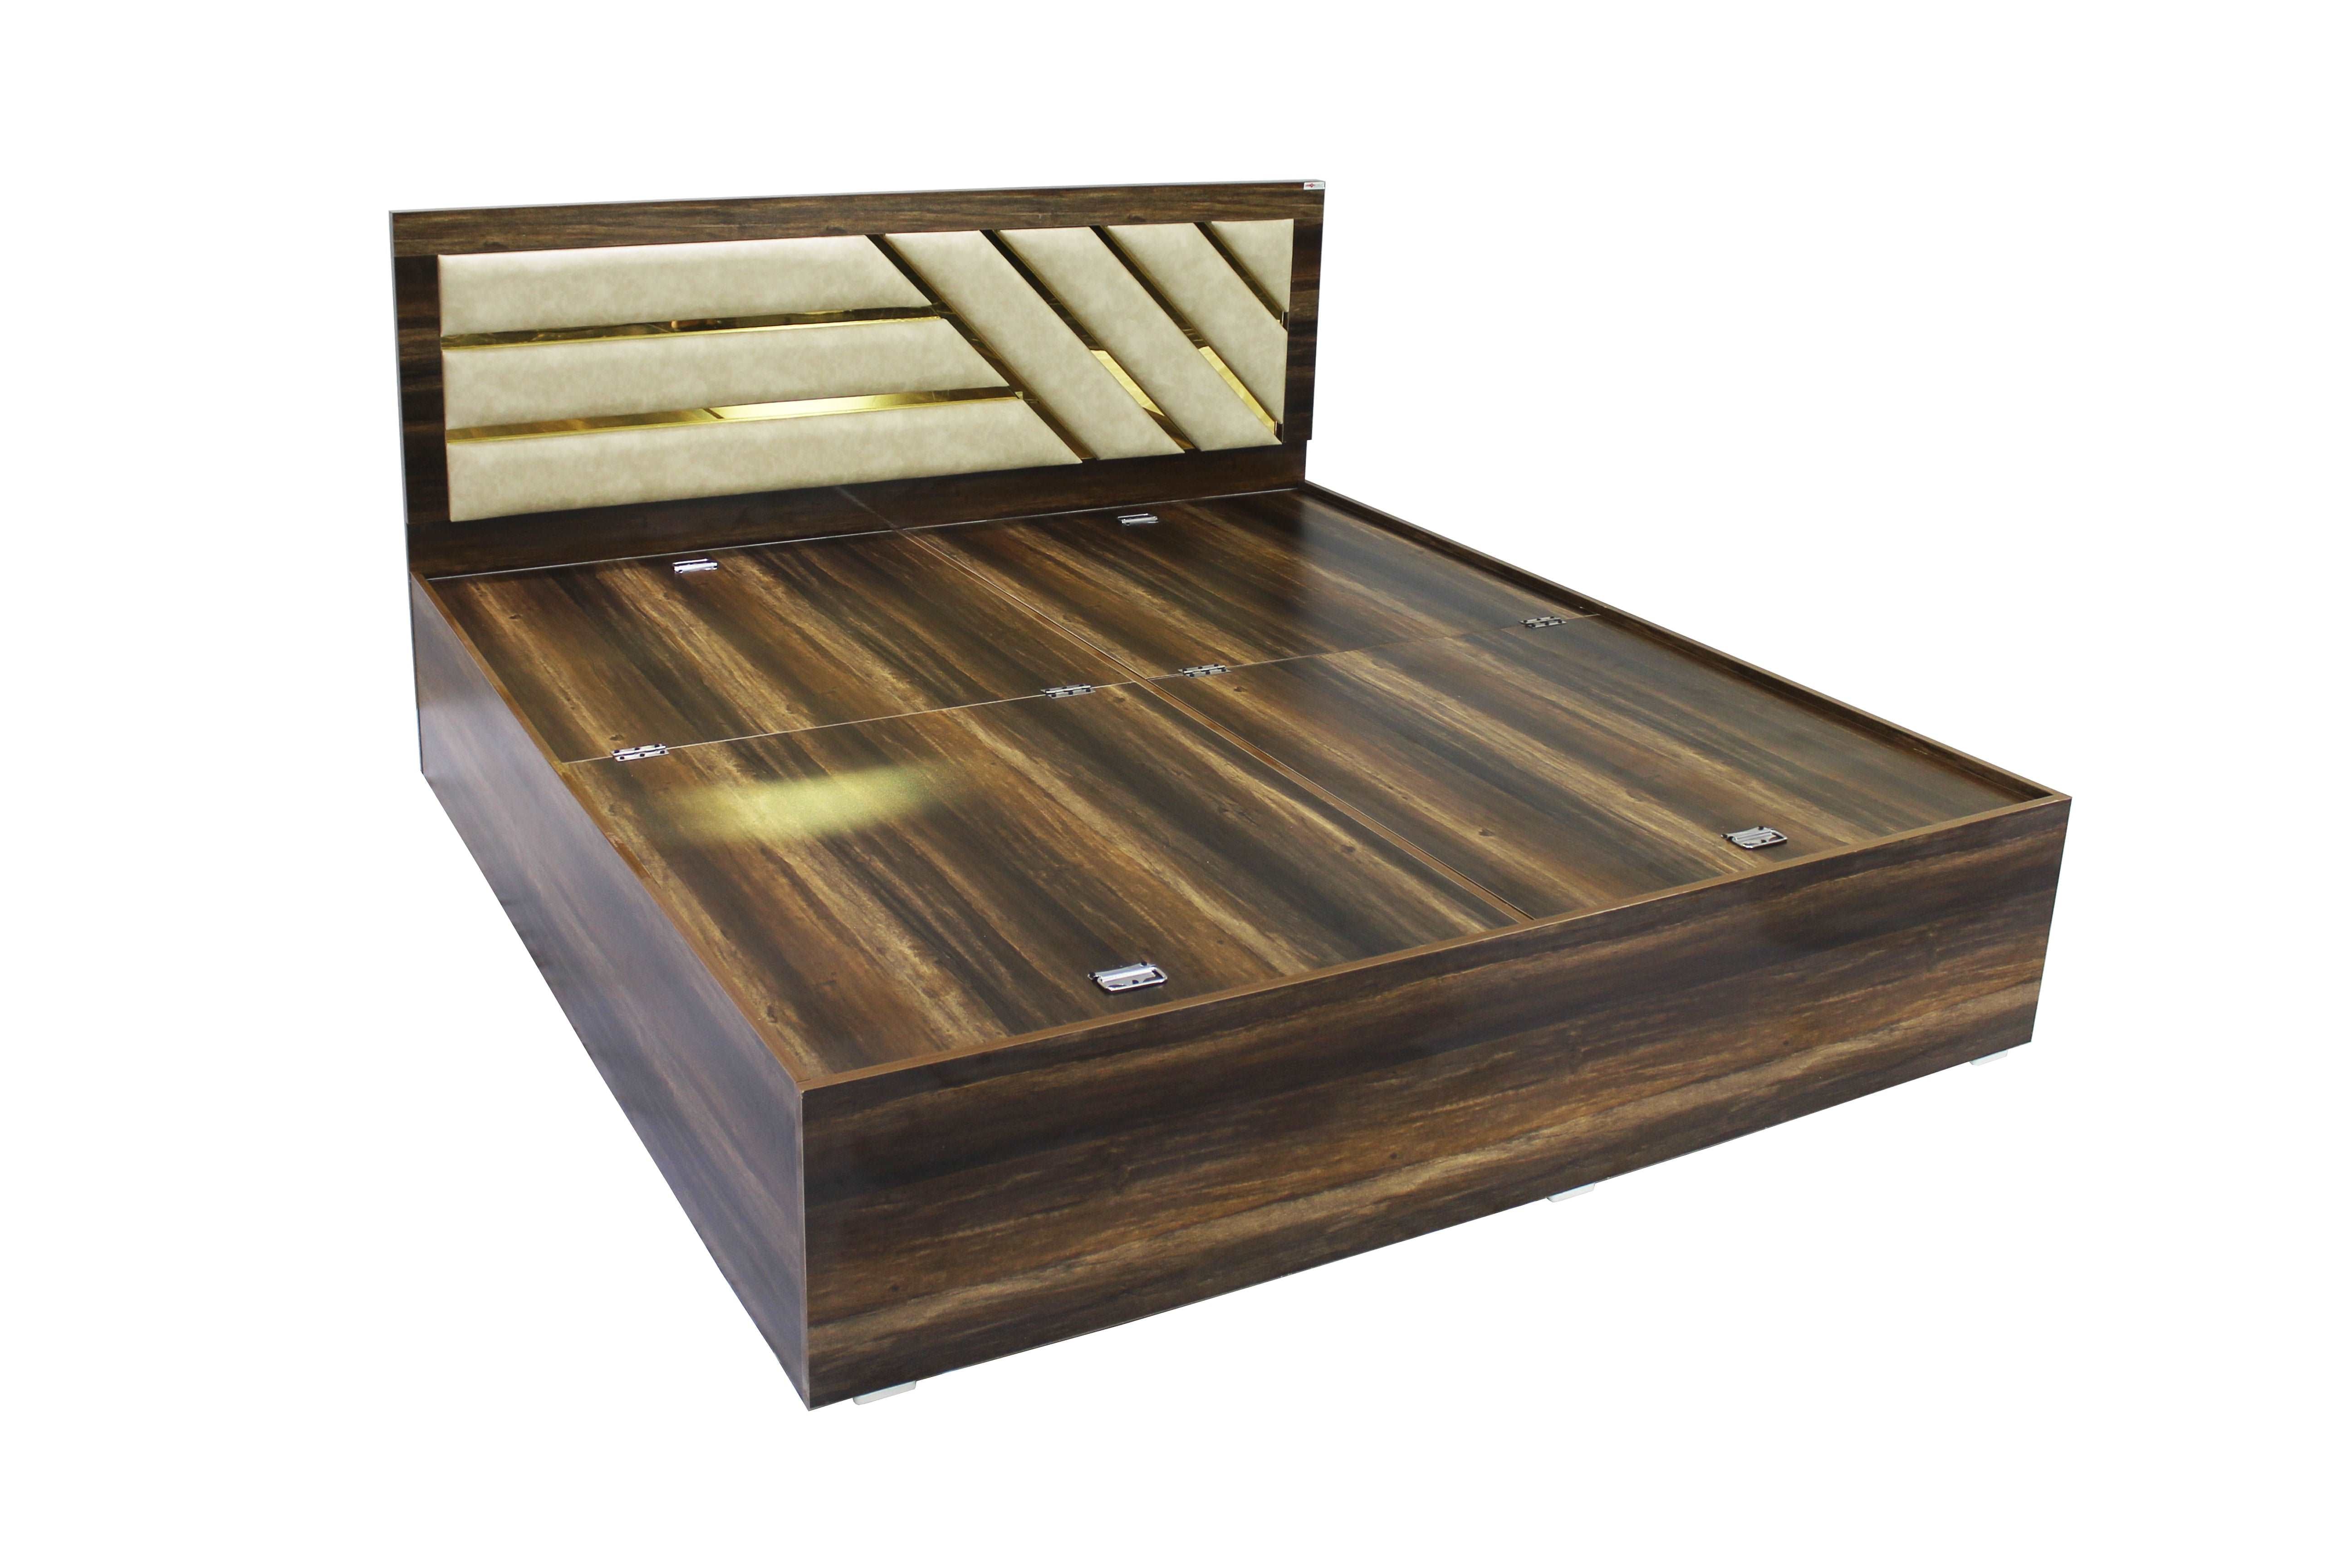 Angels King Size Box Storage Bed